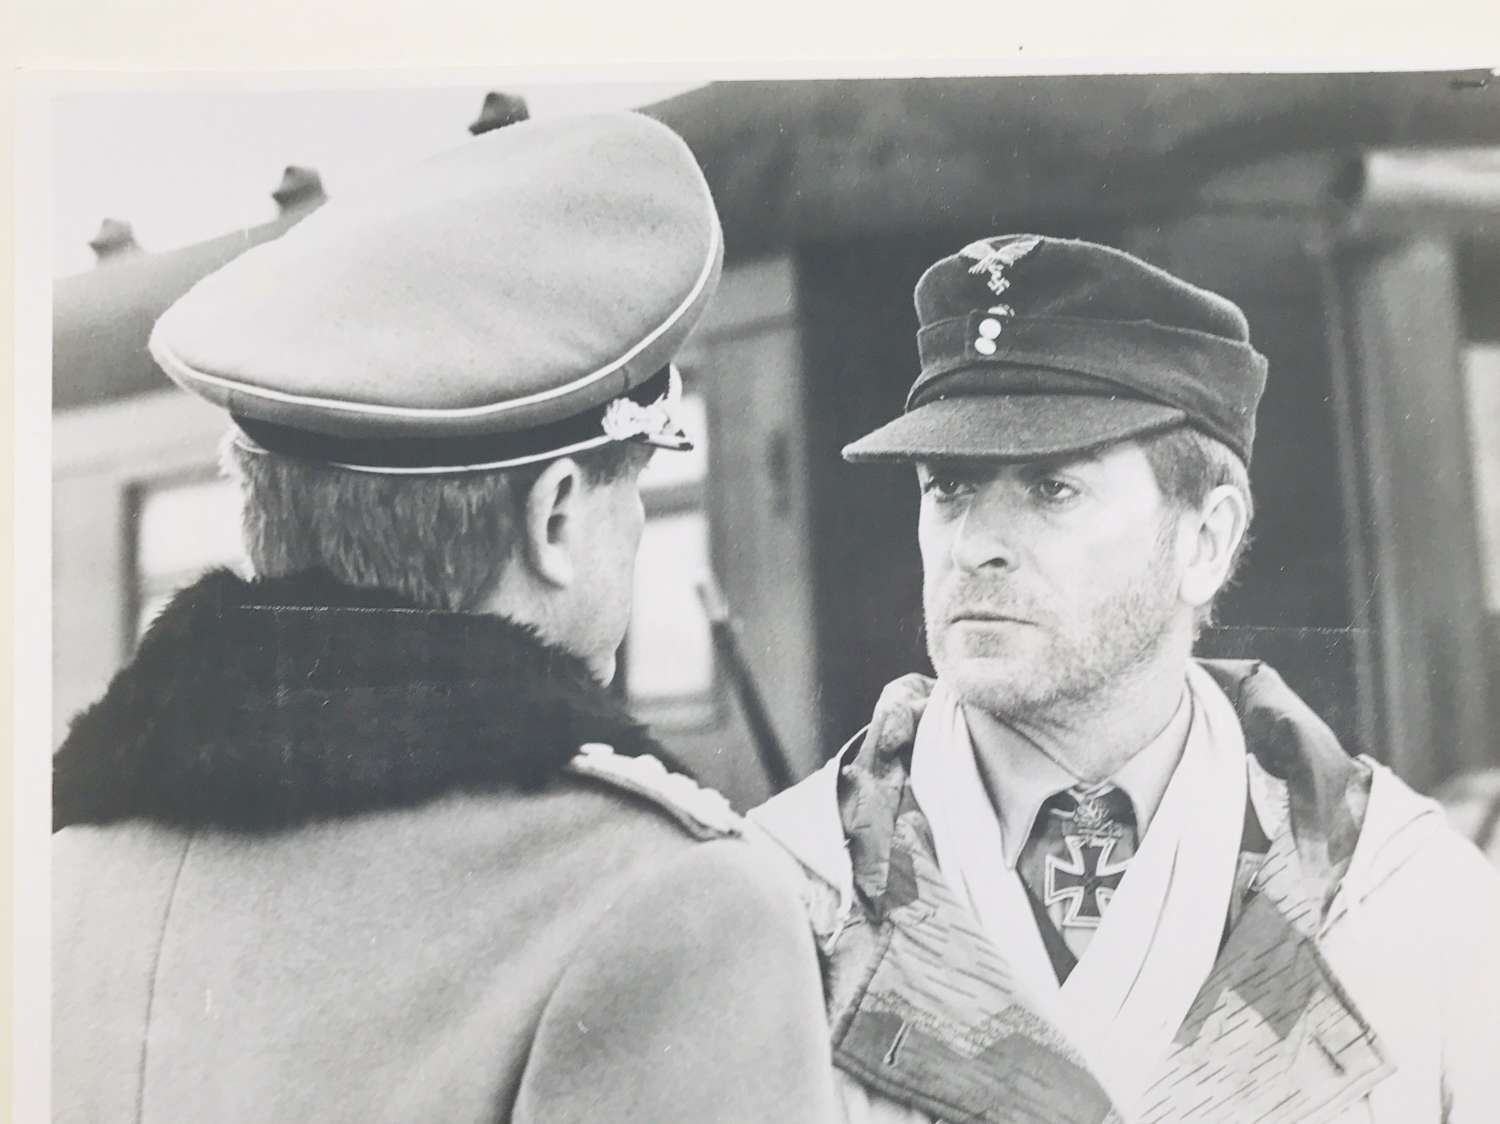 The eagle has landed Michael Caine film still